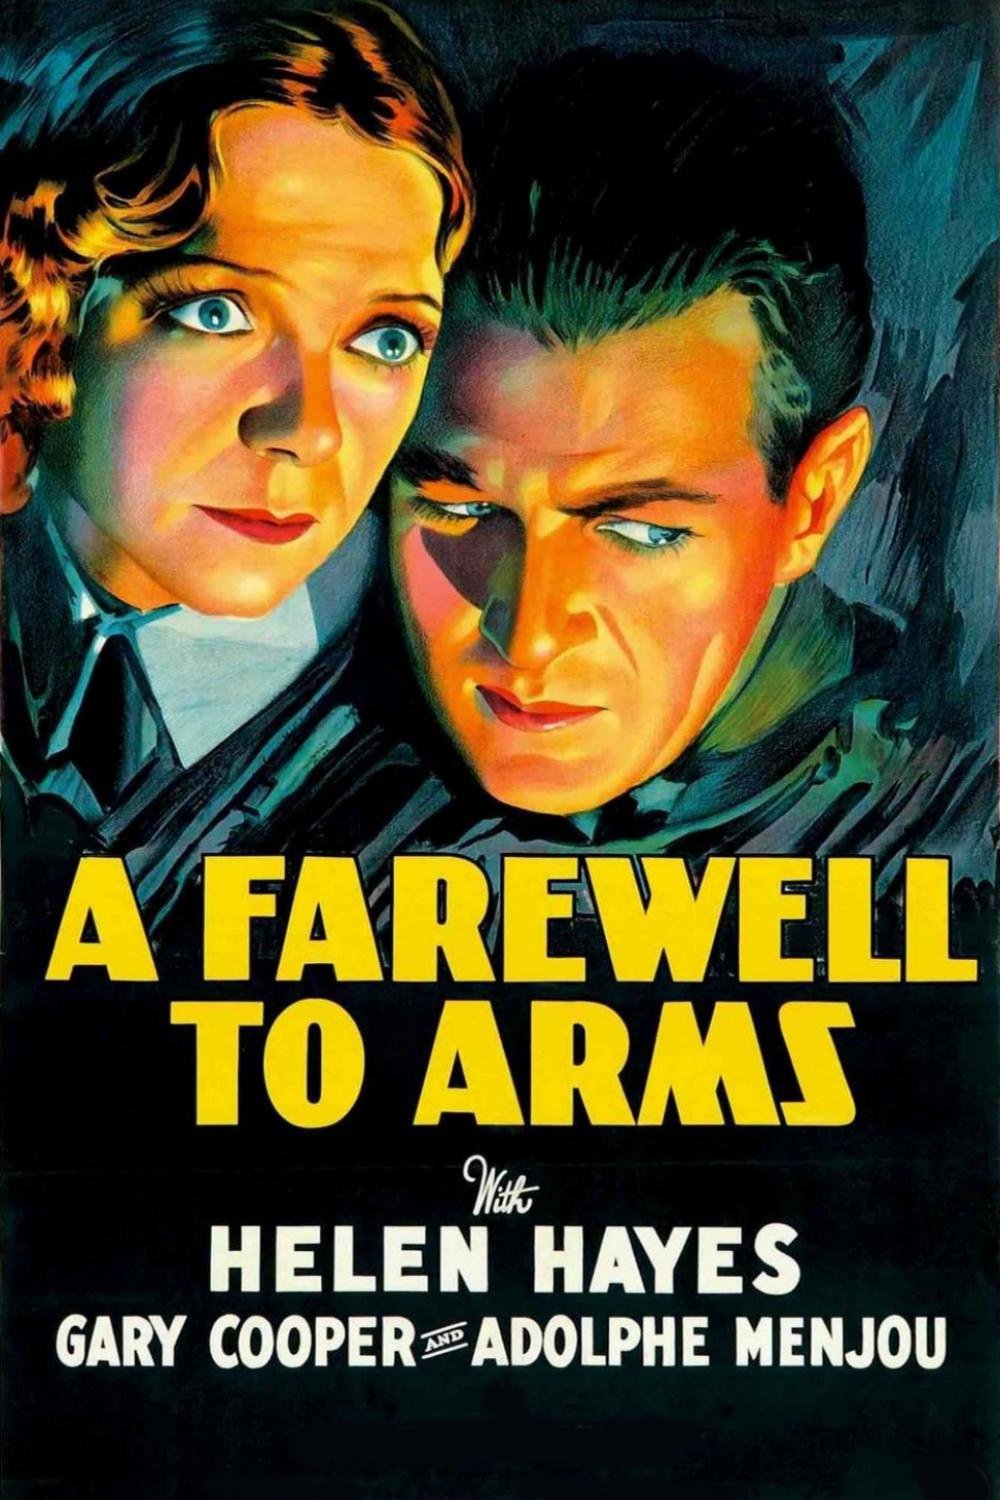 Poster for the movie "A Farewell to Arms"